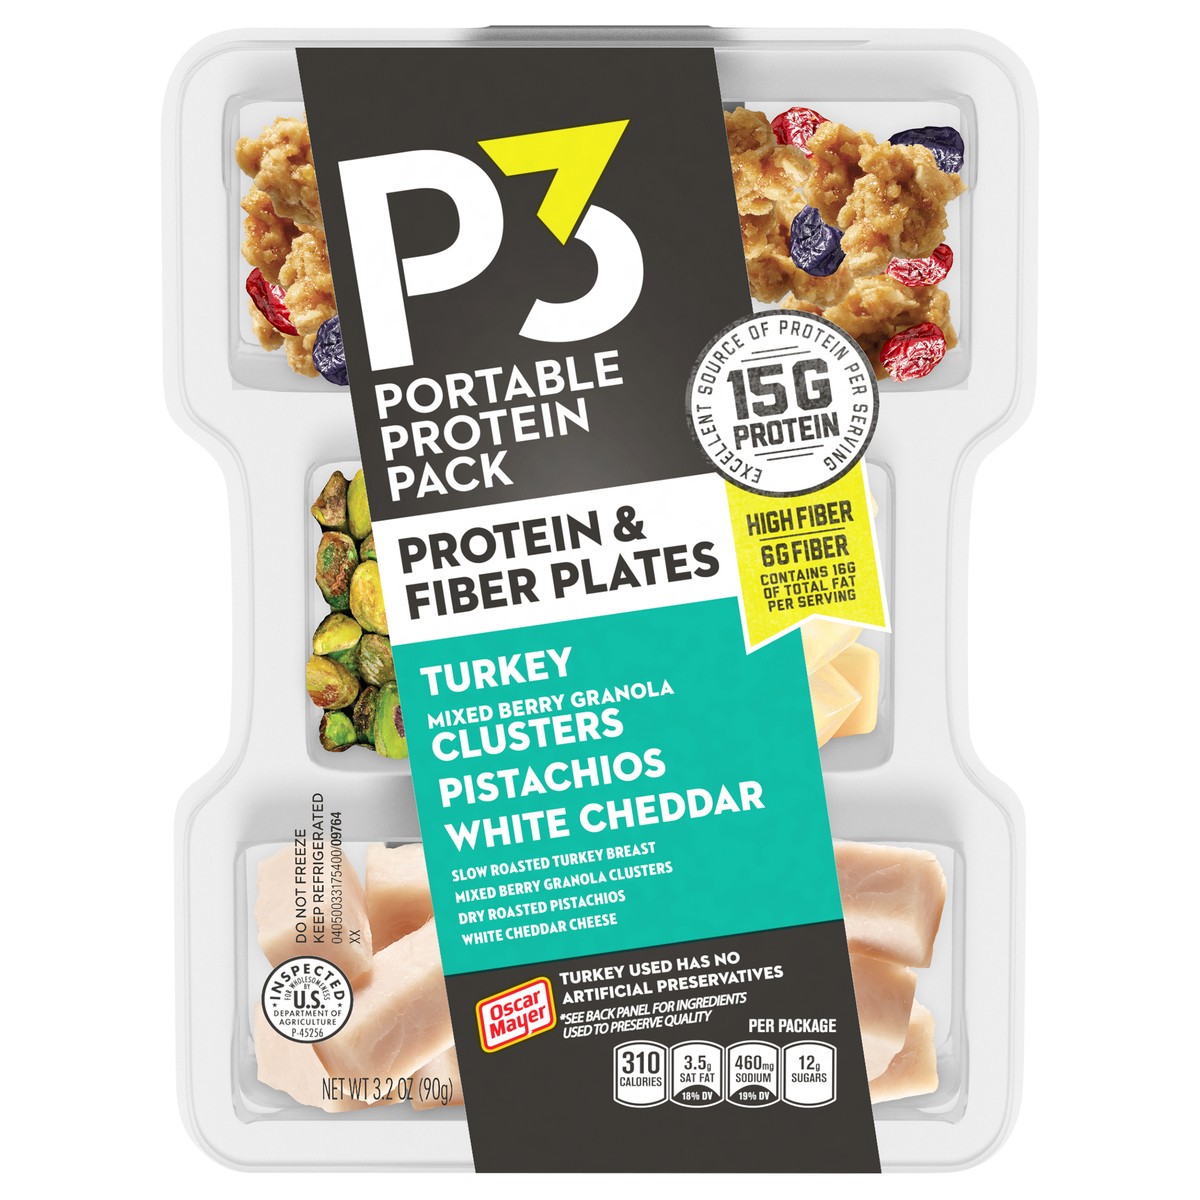 slide 1 of 6, P3 Portable Protein Snack Pack & Fiber Plate with Turkey, Mixed Berry Granola Clusters, Pistachios & White Cheddar Cheese Tray, 3.2 oz